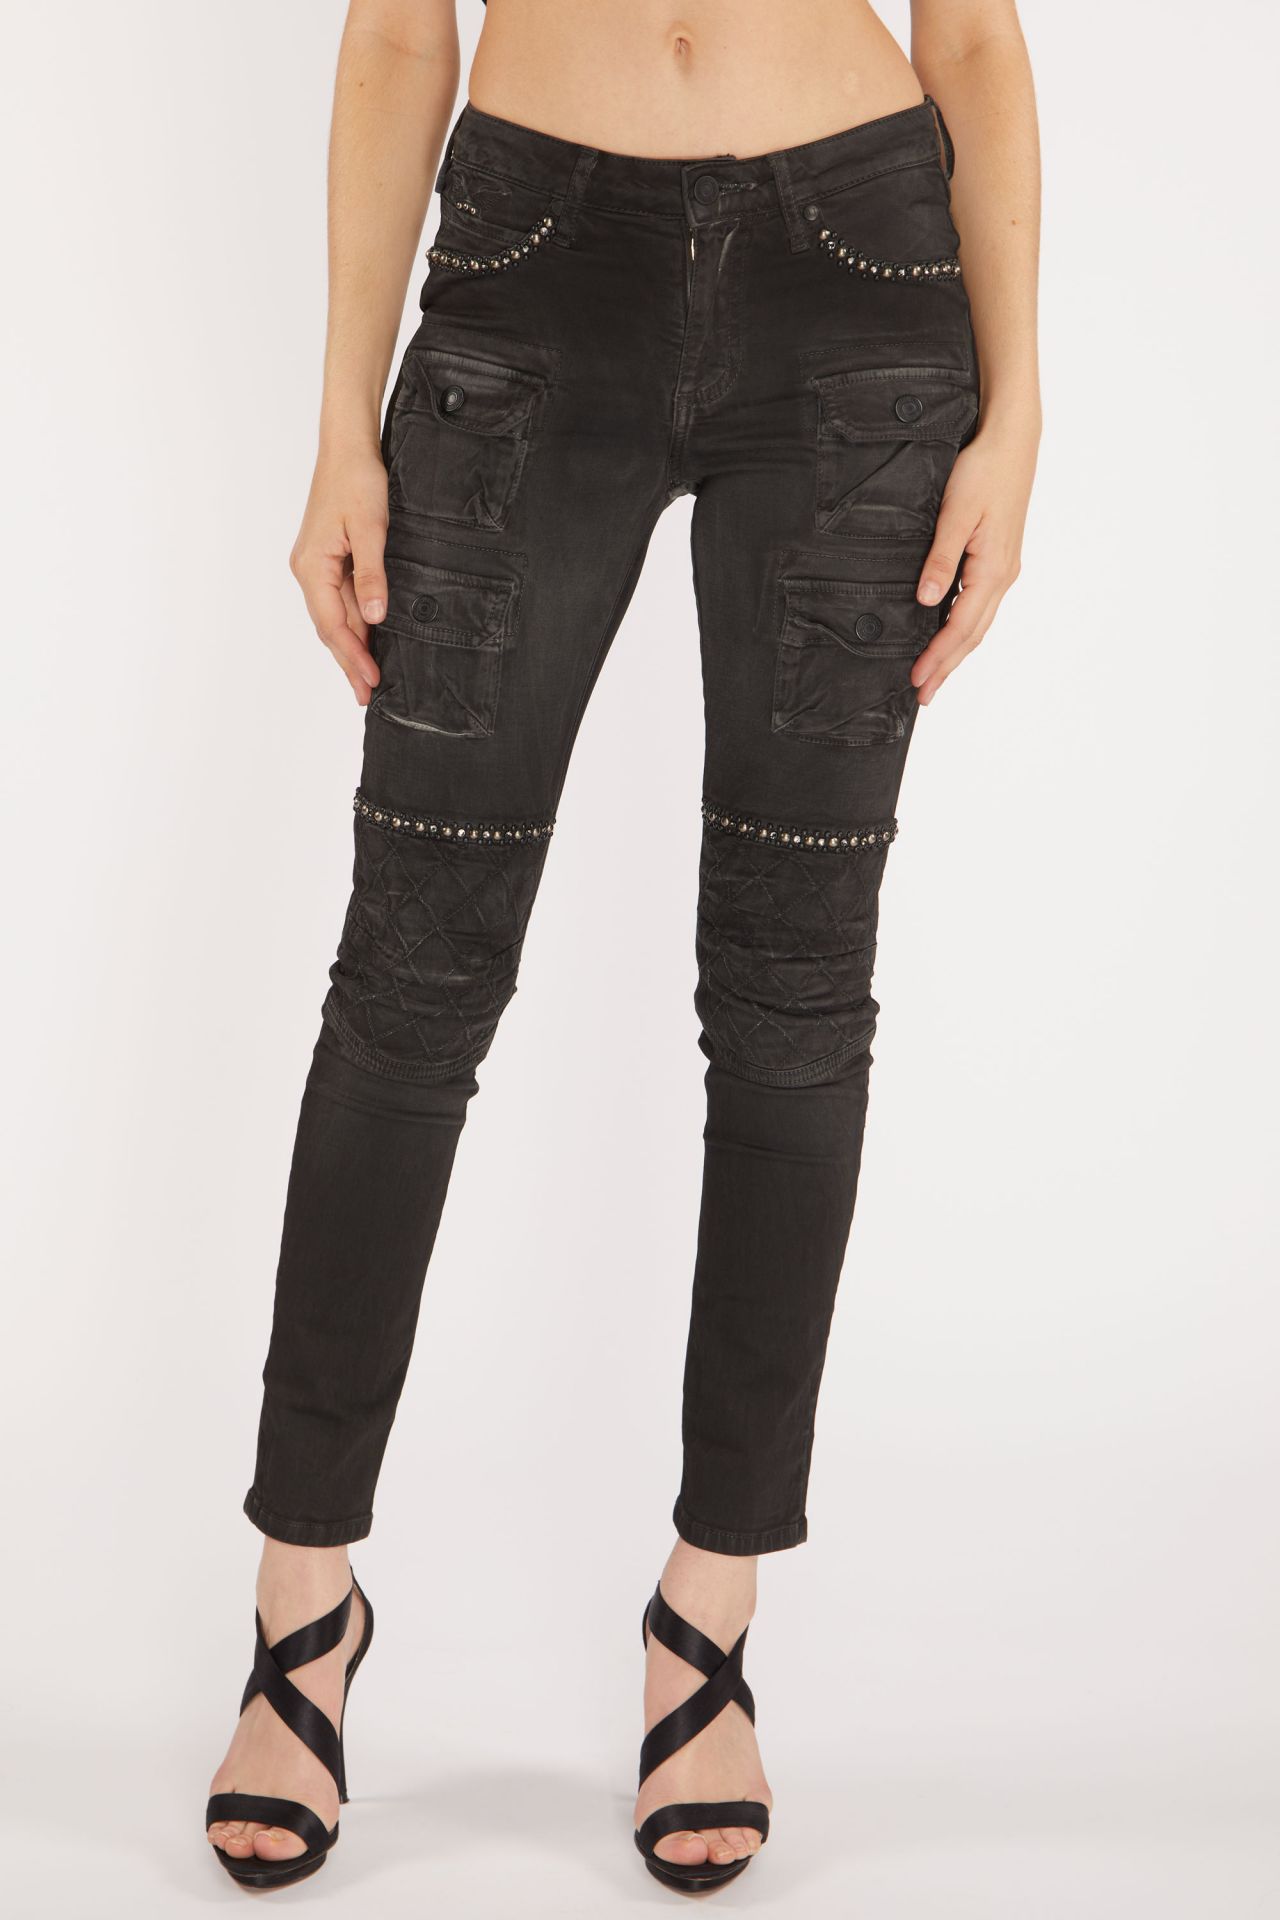 ROBIN'S MILITARY WOMEN'S UTILITARIAN JEANS IN LA BLACK WITH AND CRYSTALS